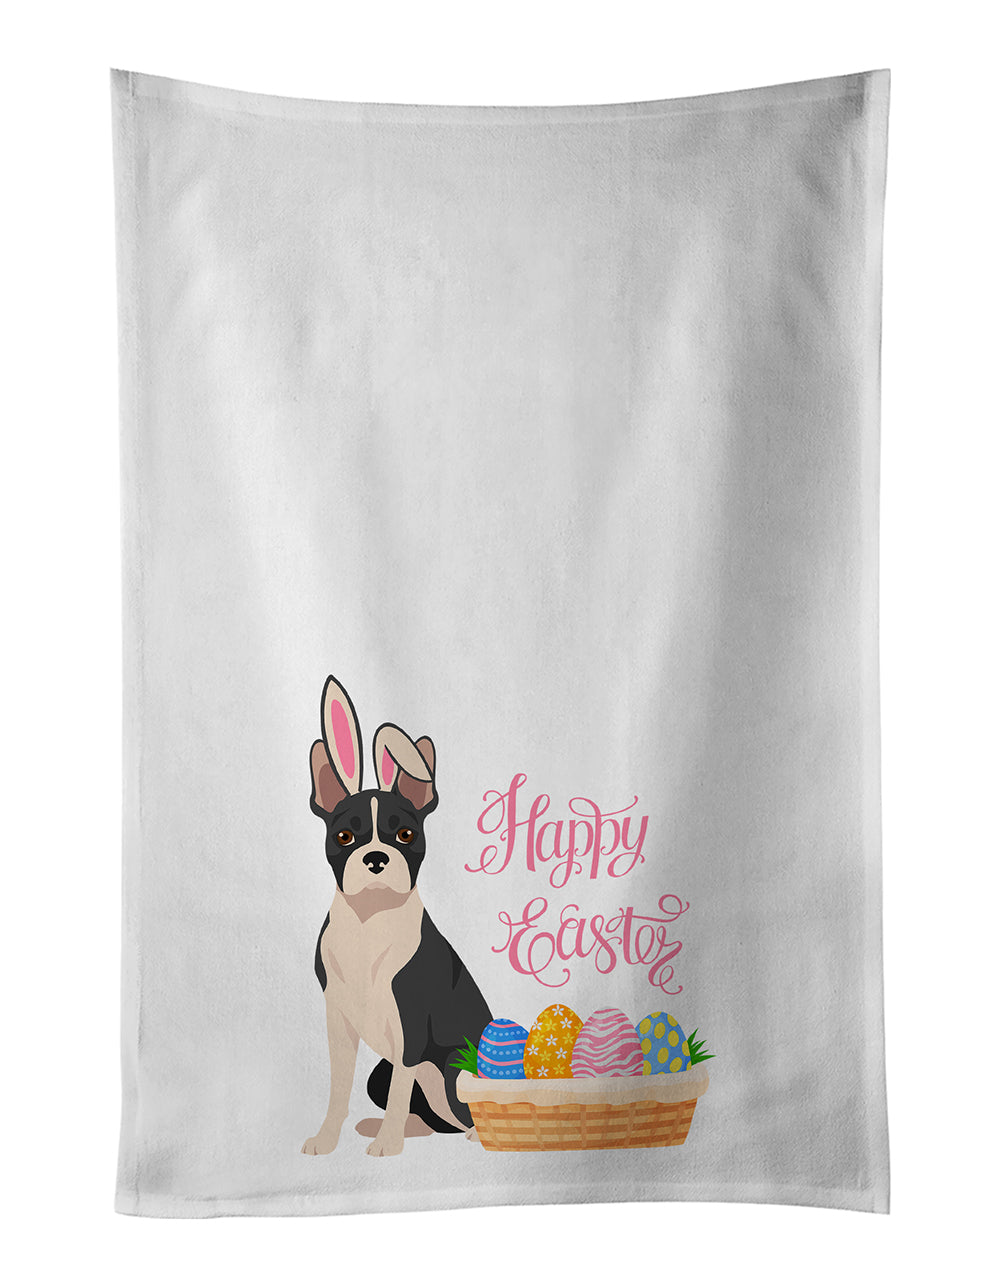 Buy this Black Boston Terrier Easter White Kitchen Towel Set of 2 Dish Towels